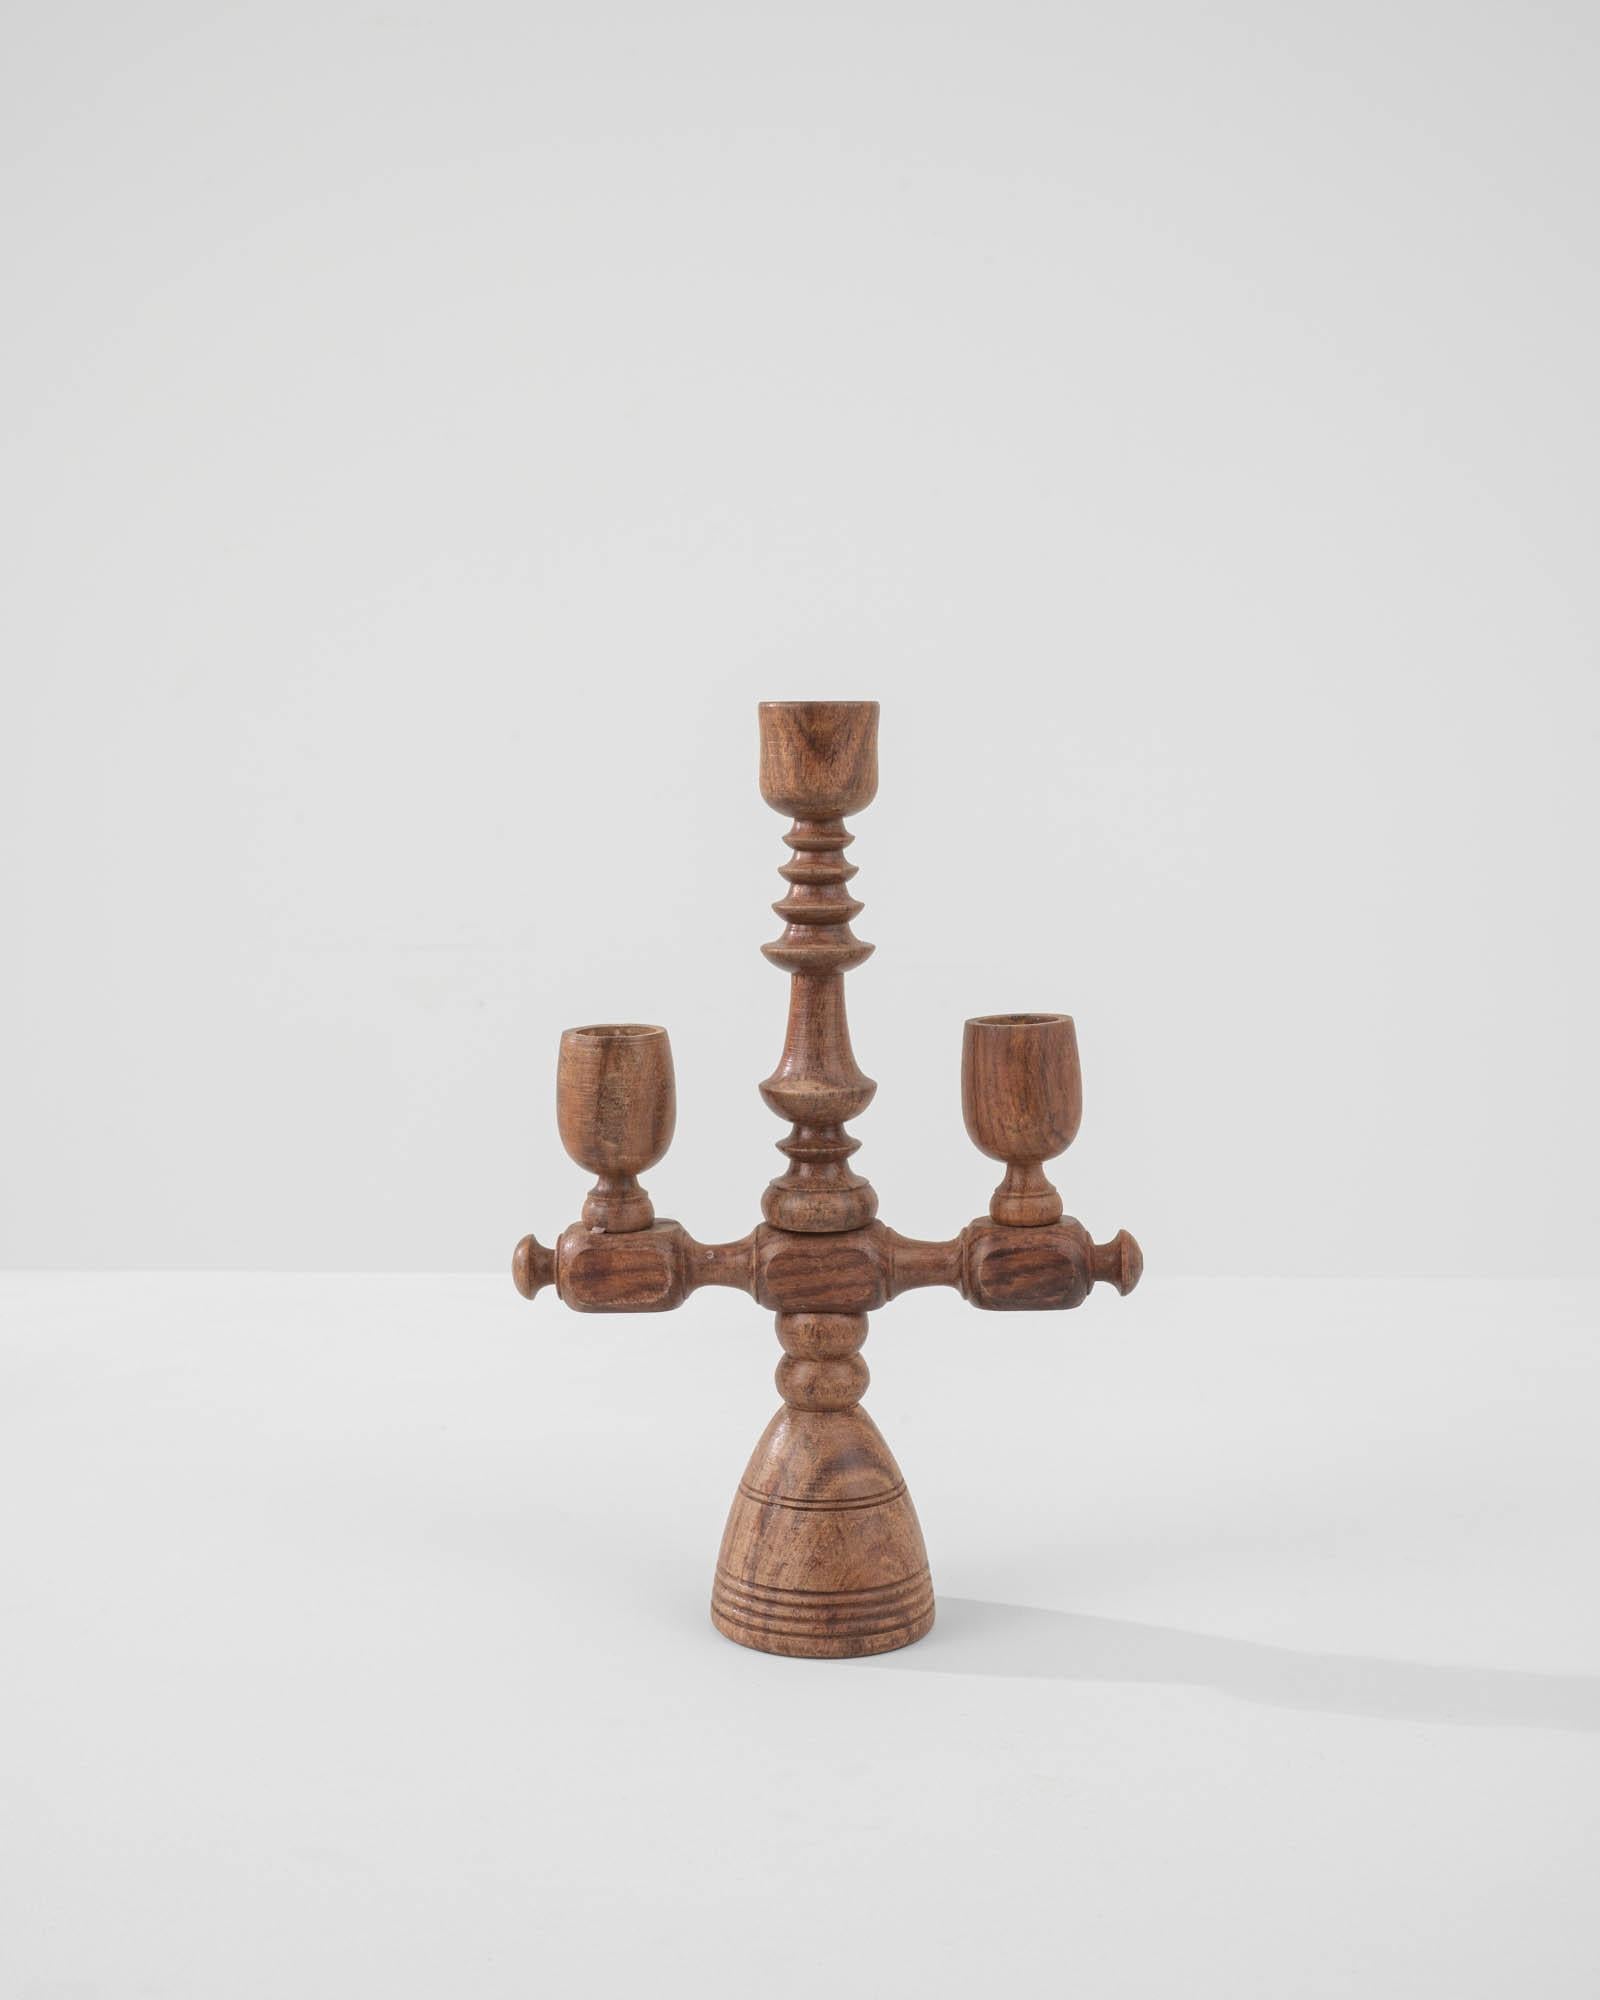 A wooden candlestick made in France in a chalet style. This elegant and capriciously crafted Chalice-like candle stick lets you add warmth whenever you would like to light a special occasion. Made of polished hardwood, this antique candlestick